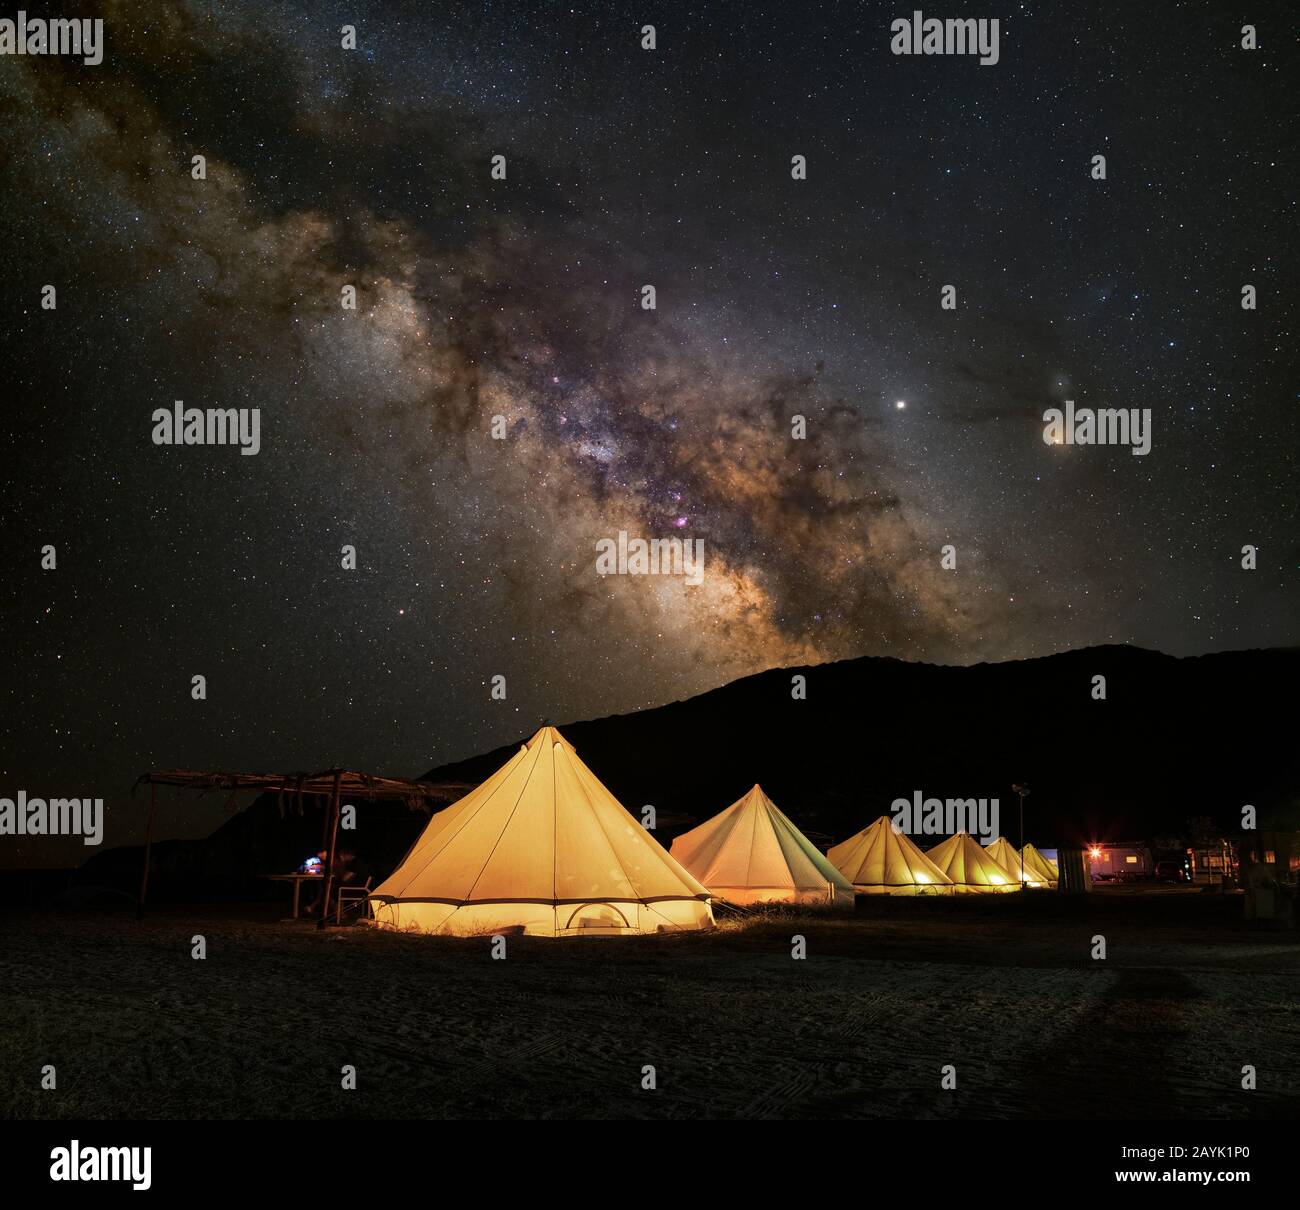 The milkyway galaxy in a camping site, Chalkidiki, Greece Stock Photo